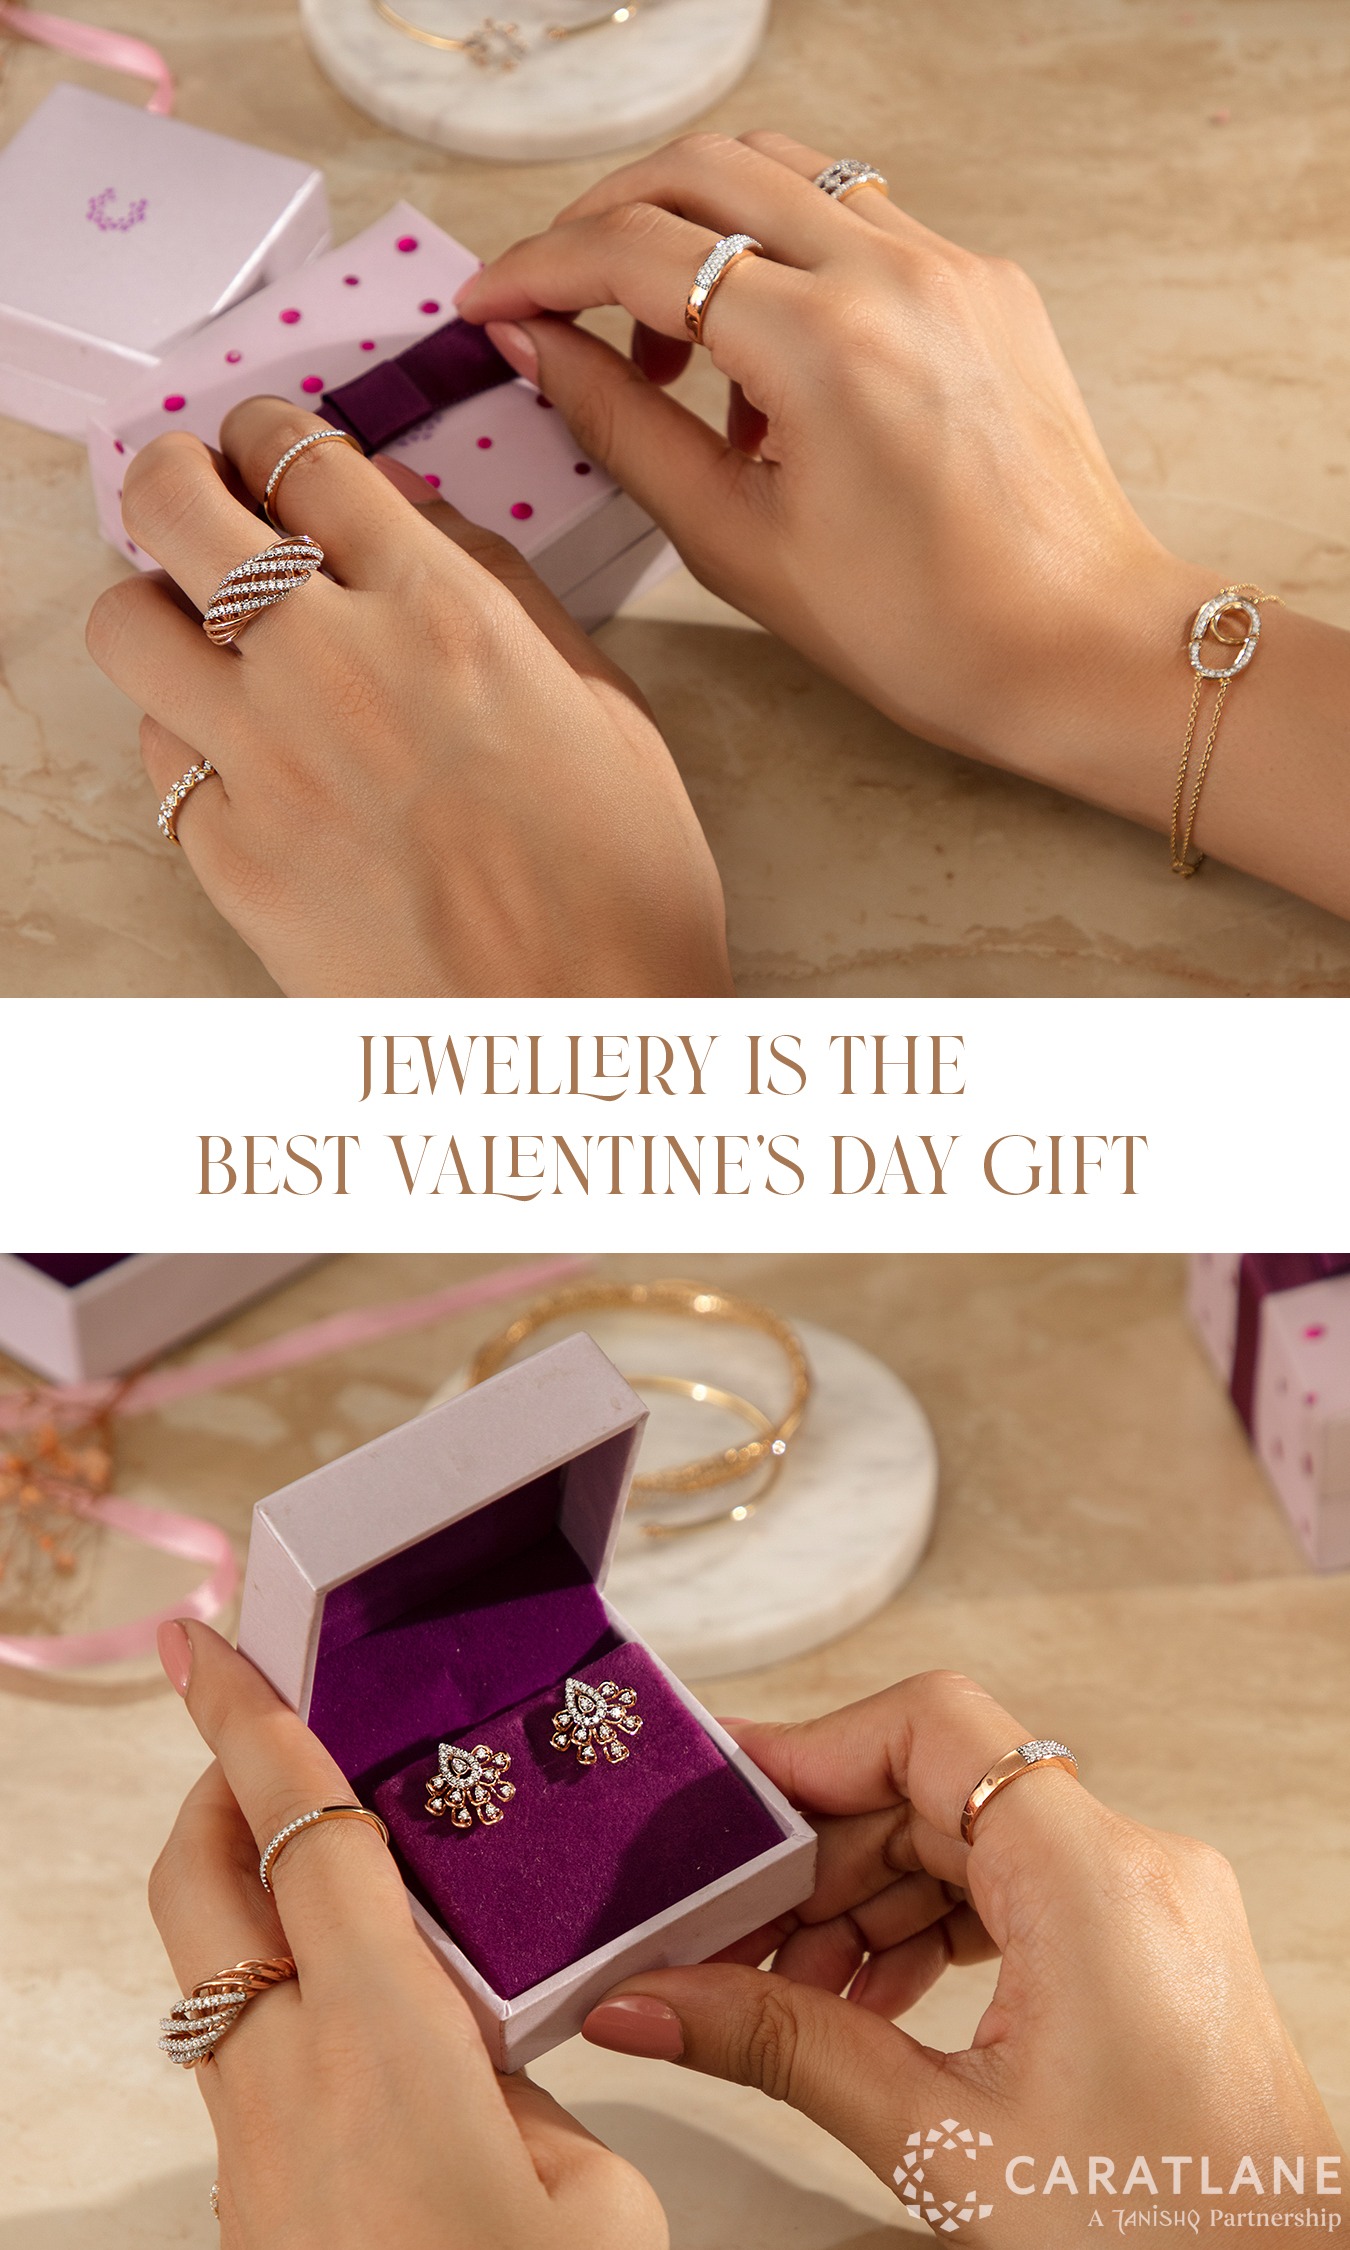 3 Reasons Why Jewellery Is The Best Valentine's Day Gift - The Caratlane